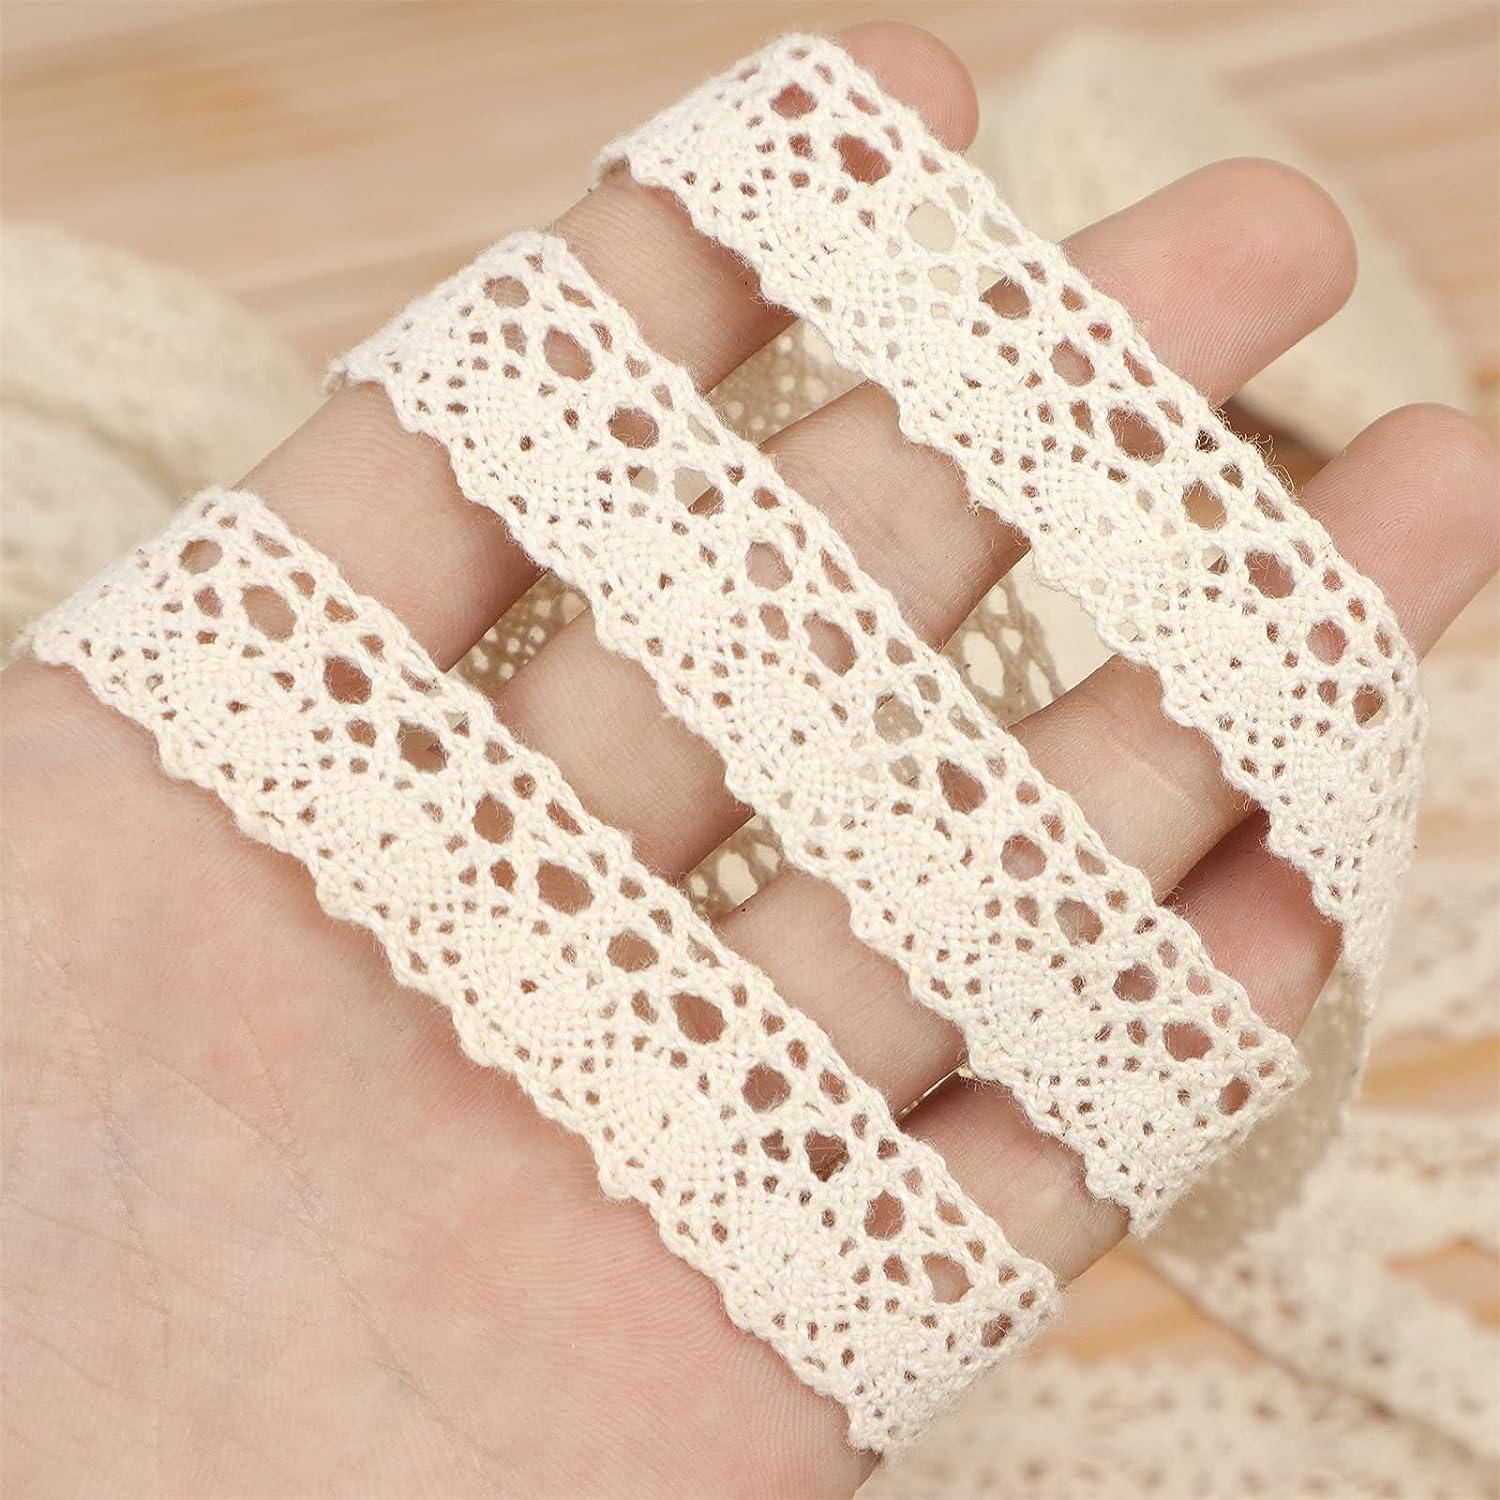 1pcs Lace Ribbon White Lace Trim Yard, Crochet Sewing Lace Ribbons for  Crafts, Assorted Eyelet Lace Roll for DIY Scrapbooking Dollies Wedding  Supply